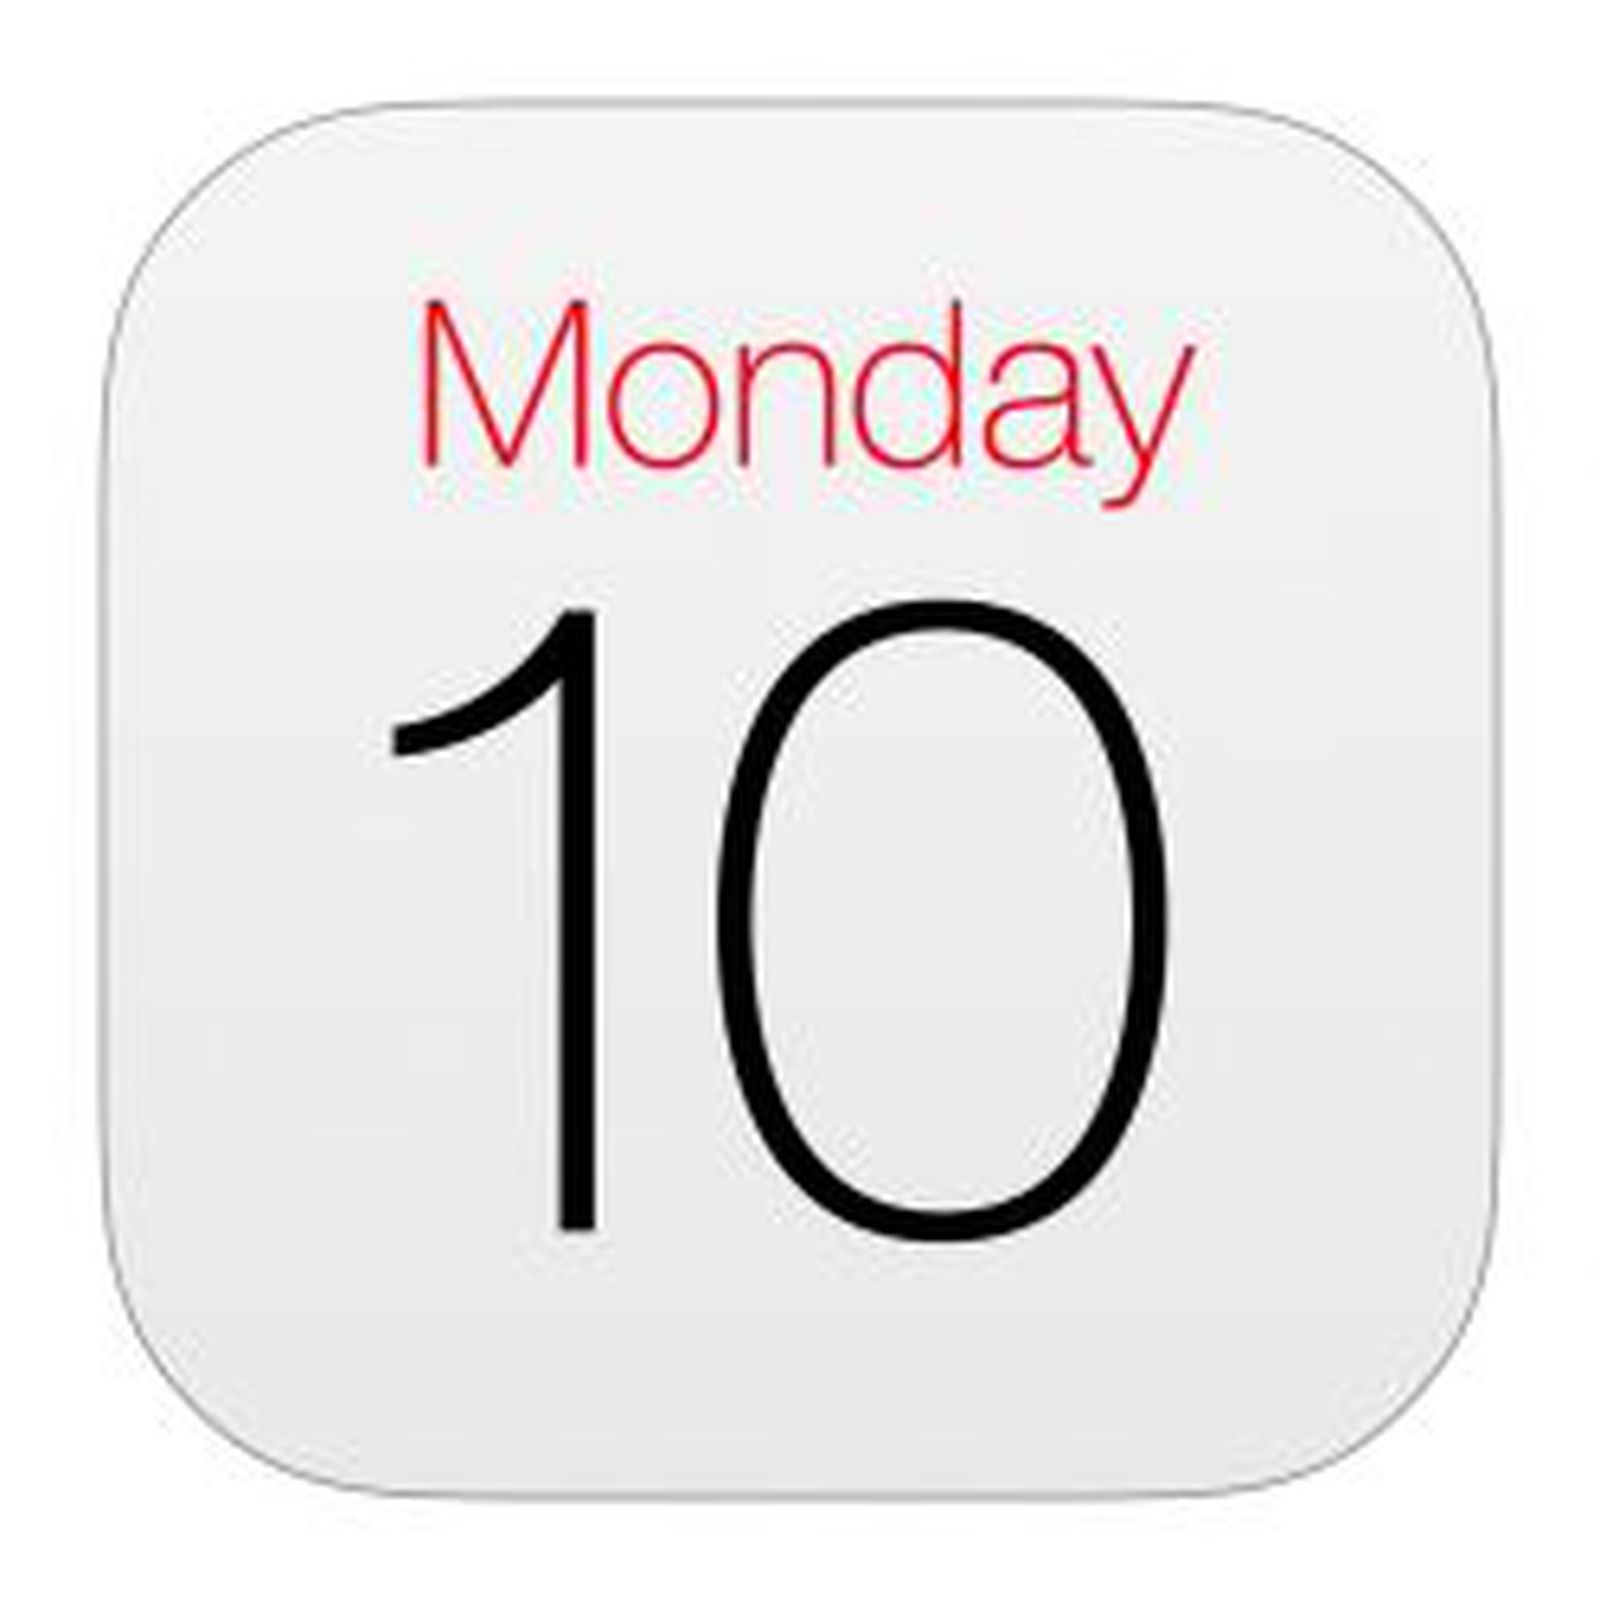 how-to-add-attachments-to-calendar-events-in-ios-macrumors